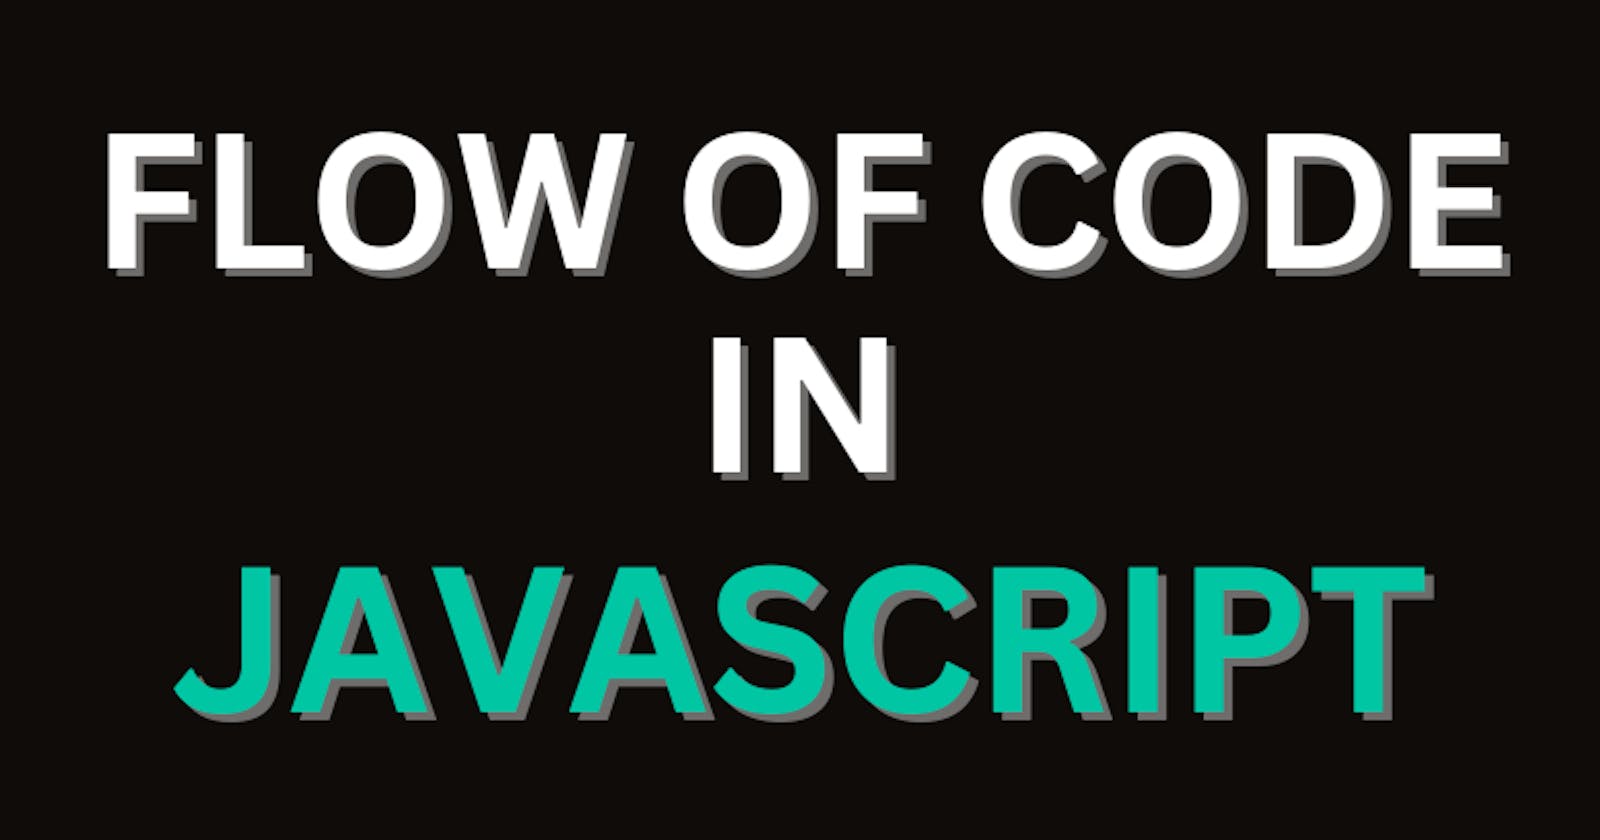 Flow of code execution in JavaScript